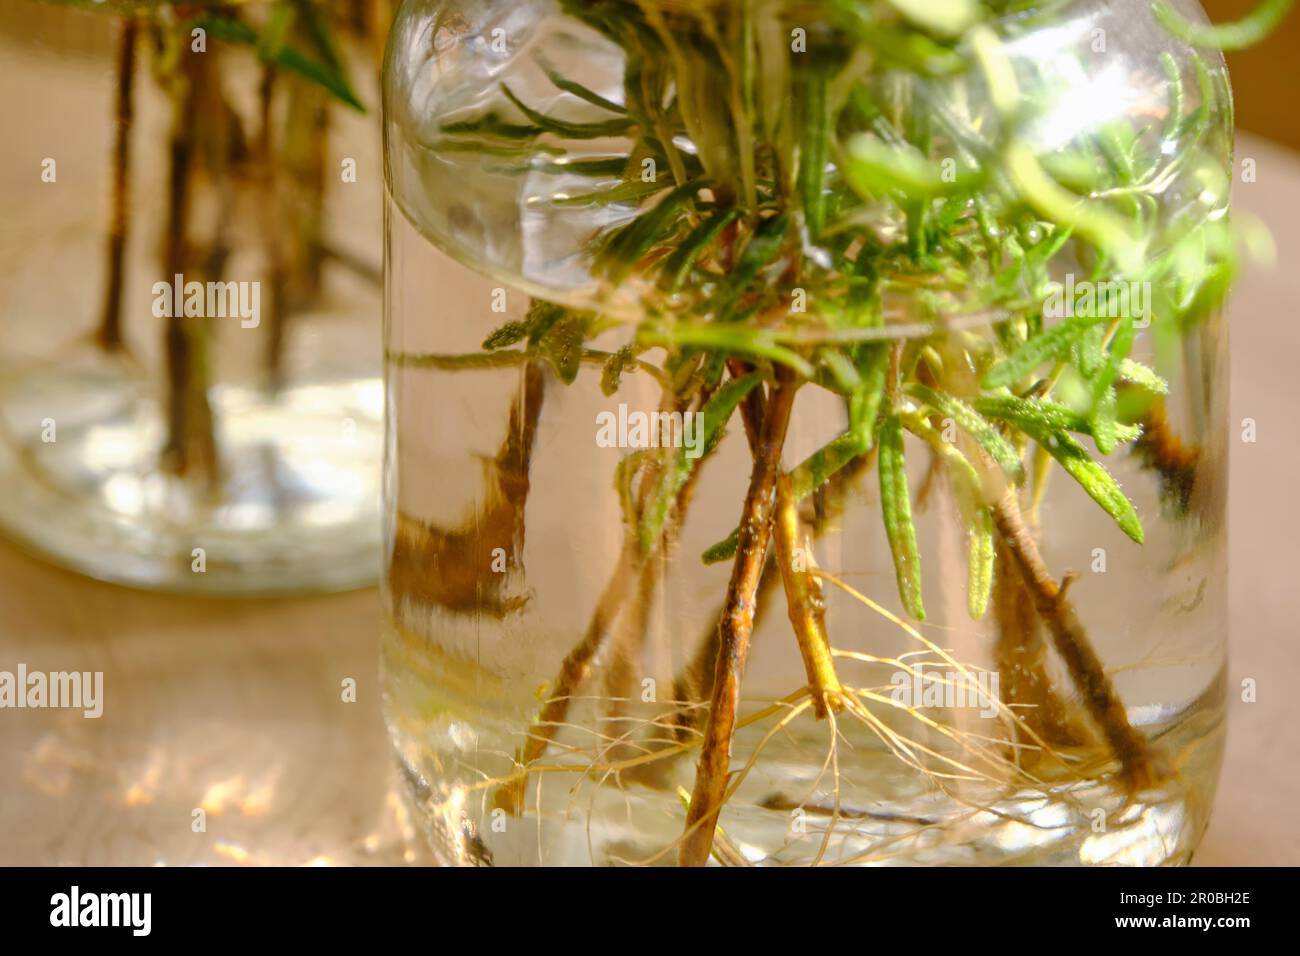 Closeup of rooting rosemary or salvia rosmarinus cuttings in glass jars with water on a wooden table. Home gardening concept. Stock Photo